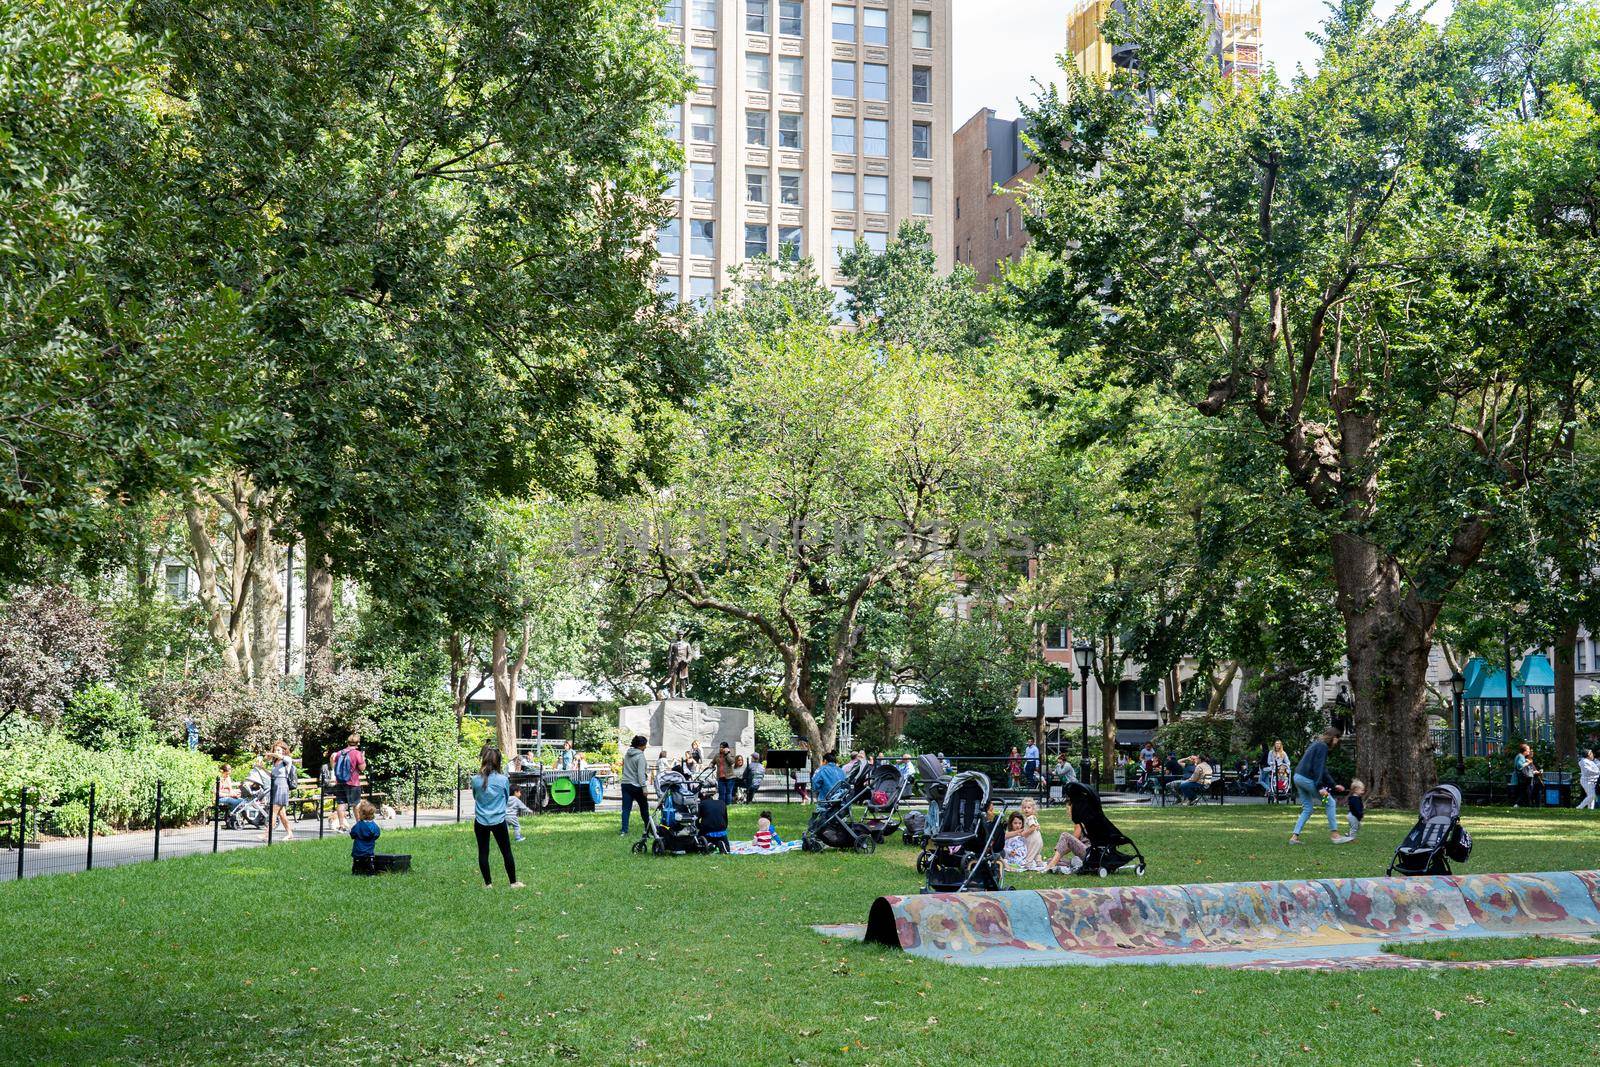 New York City, USA - September 20, 2019: People relaxing in Madison Square Park.